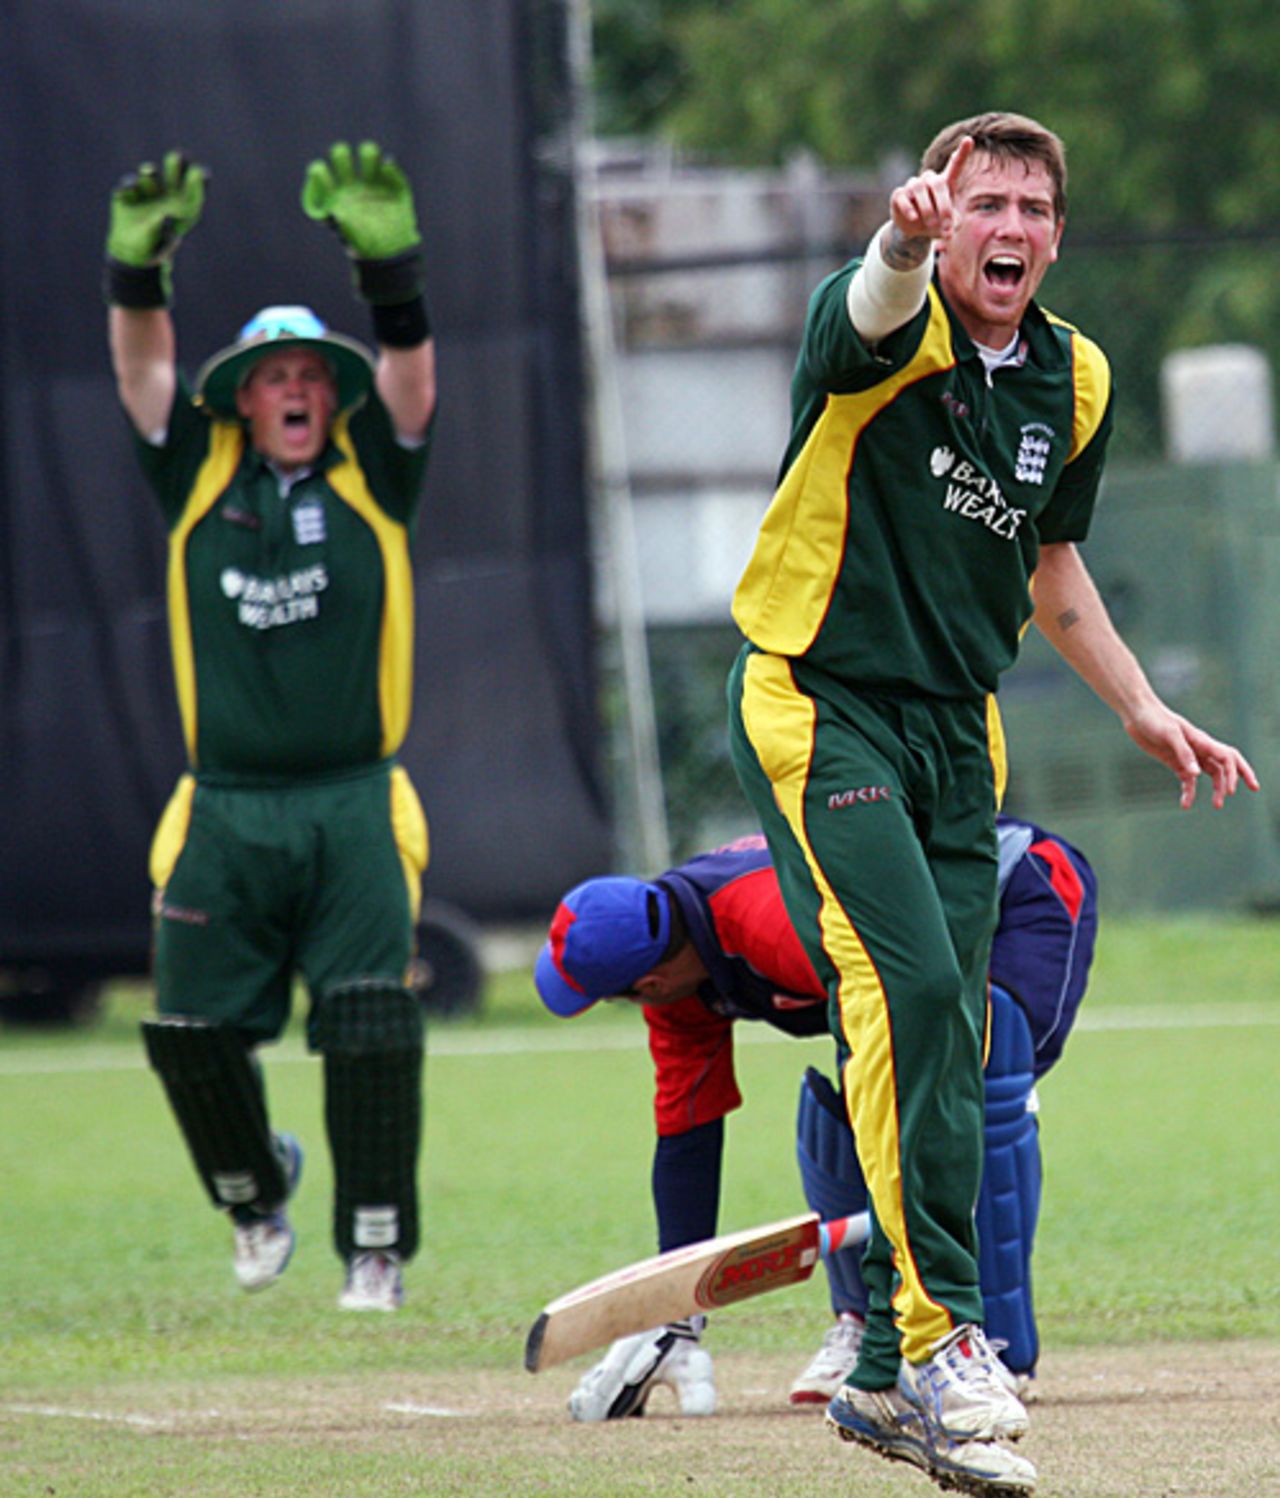 Blane Queripel successfully appeals for the wicket of  Imran Sajjad, Bahrain v Guernsey, ICC World Cricket League Division 6, Singapore, August 31, 2009